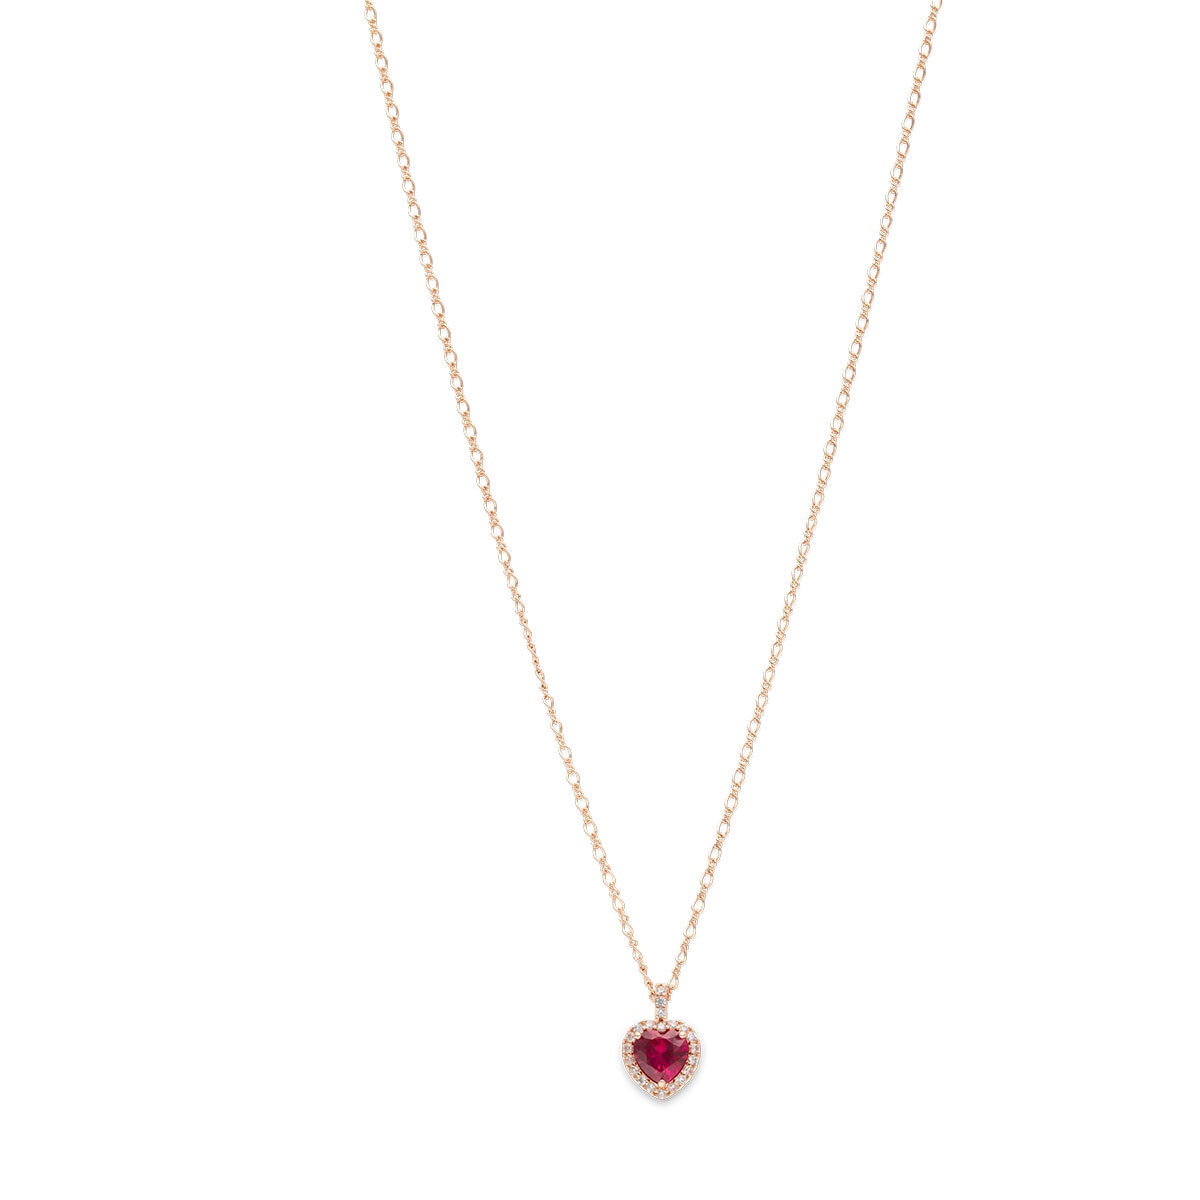 Delphine necklace - Pink ruby